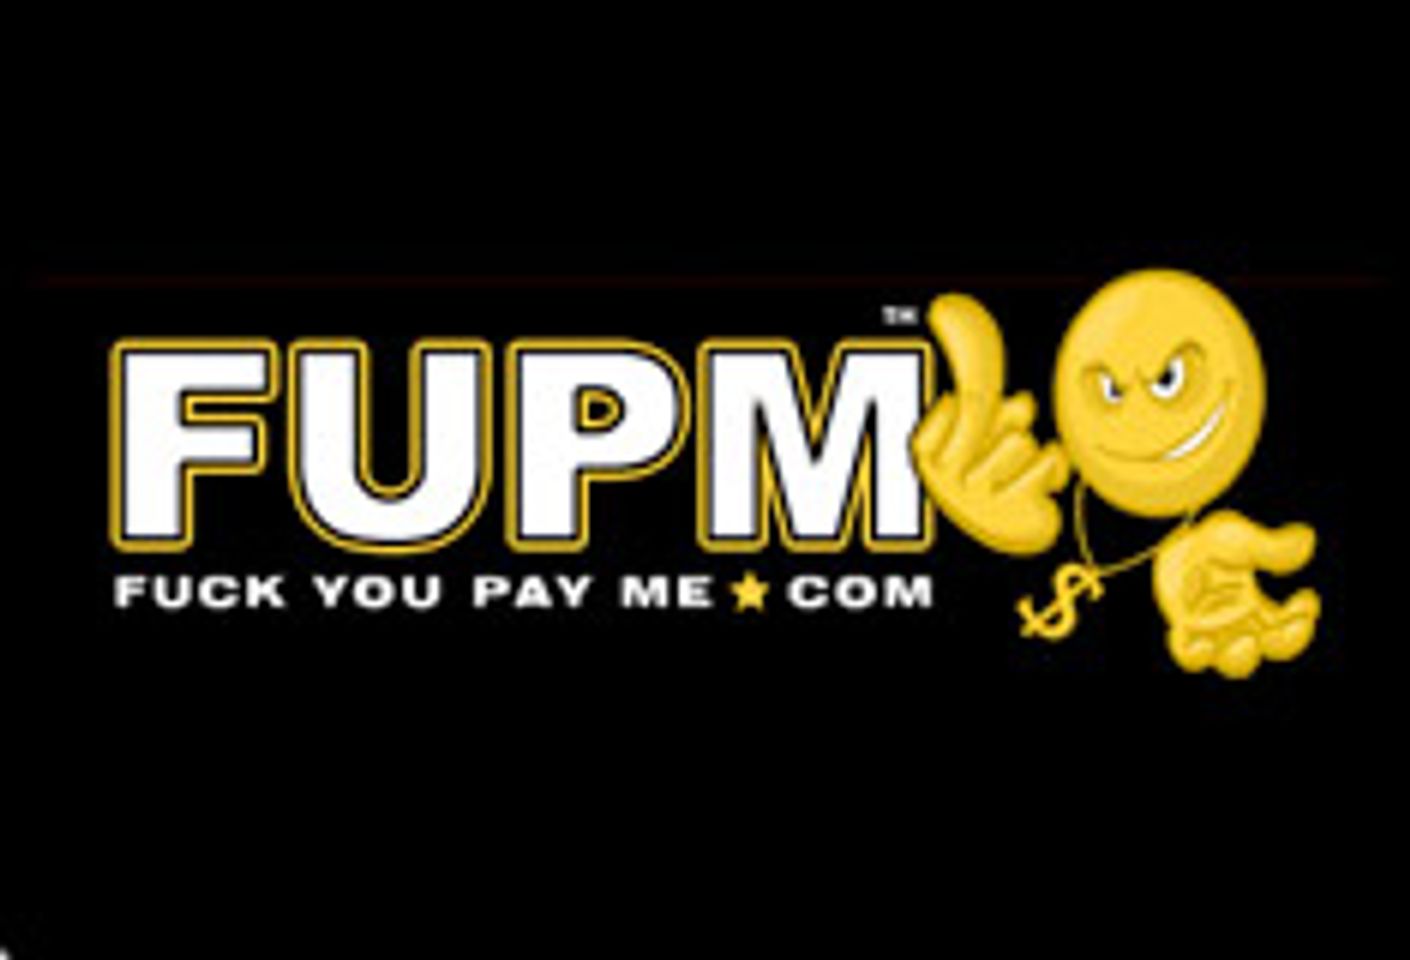 FuckYouPayMe Launches Three Promotions